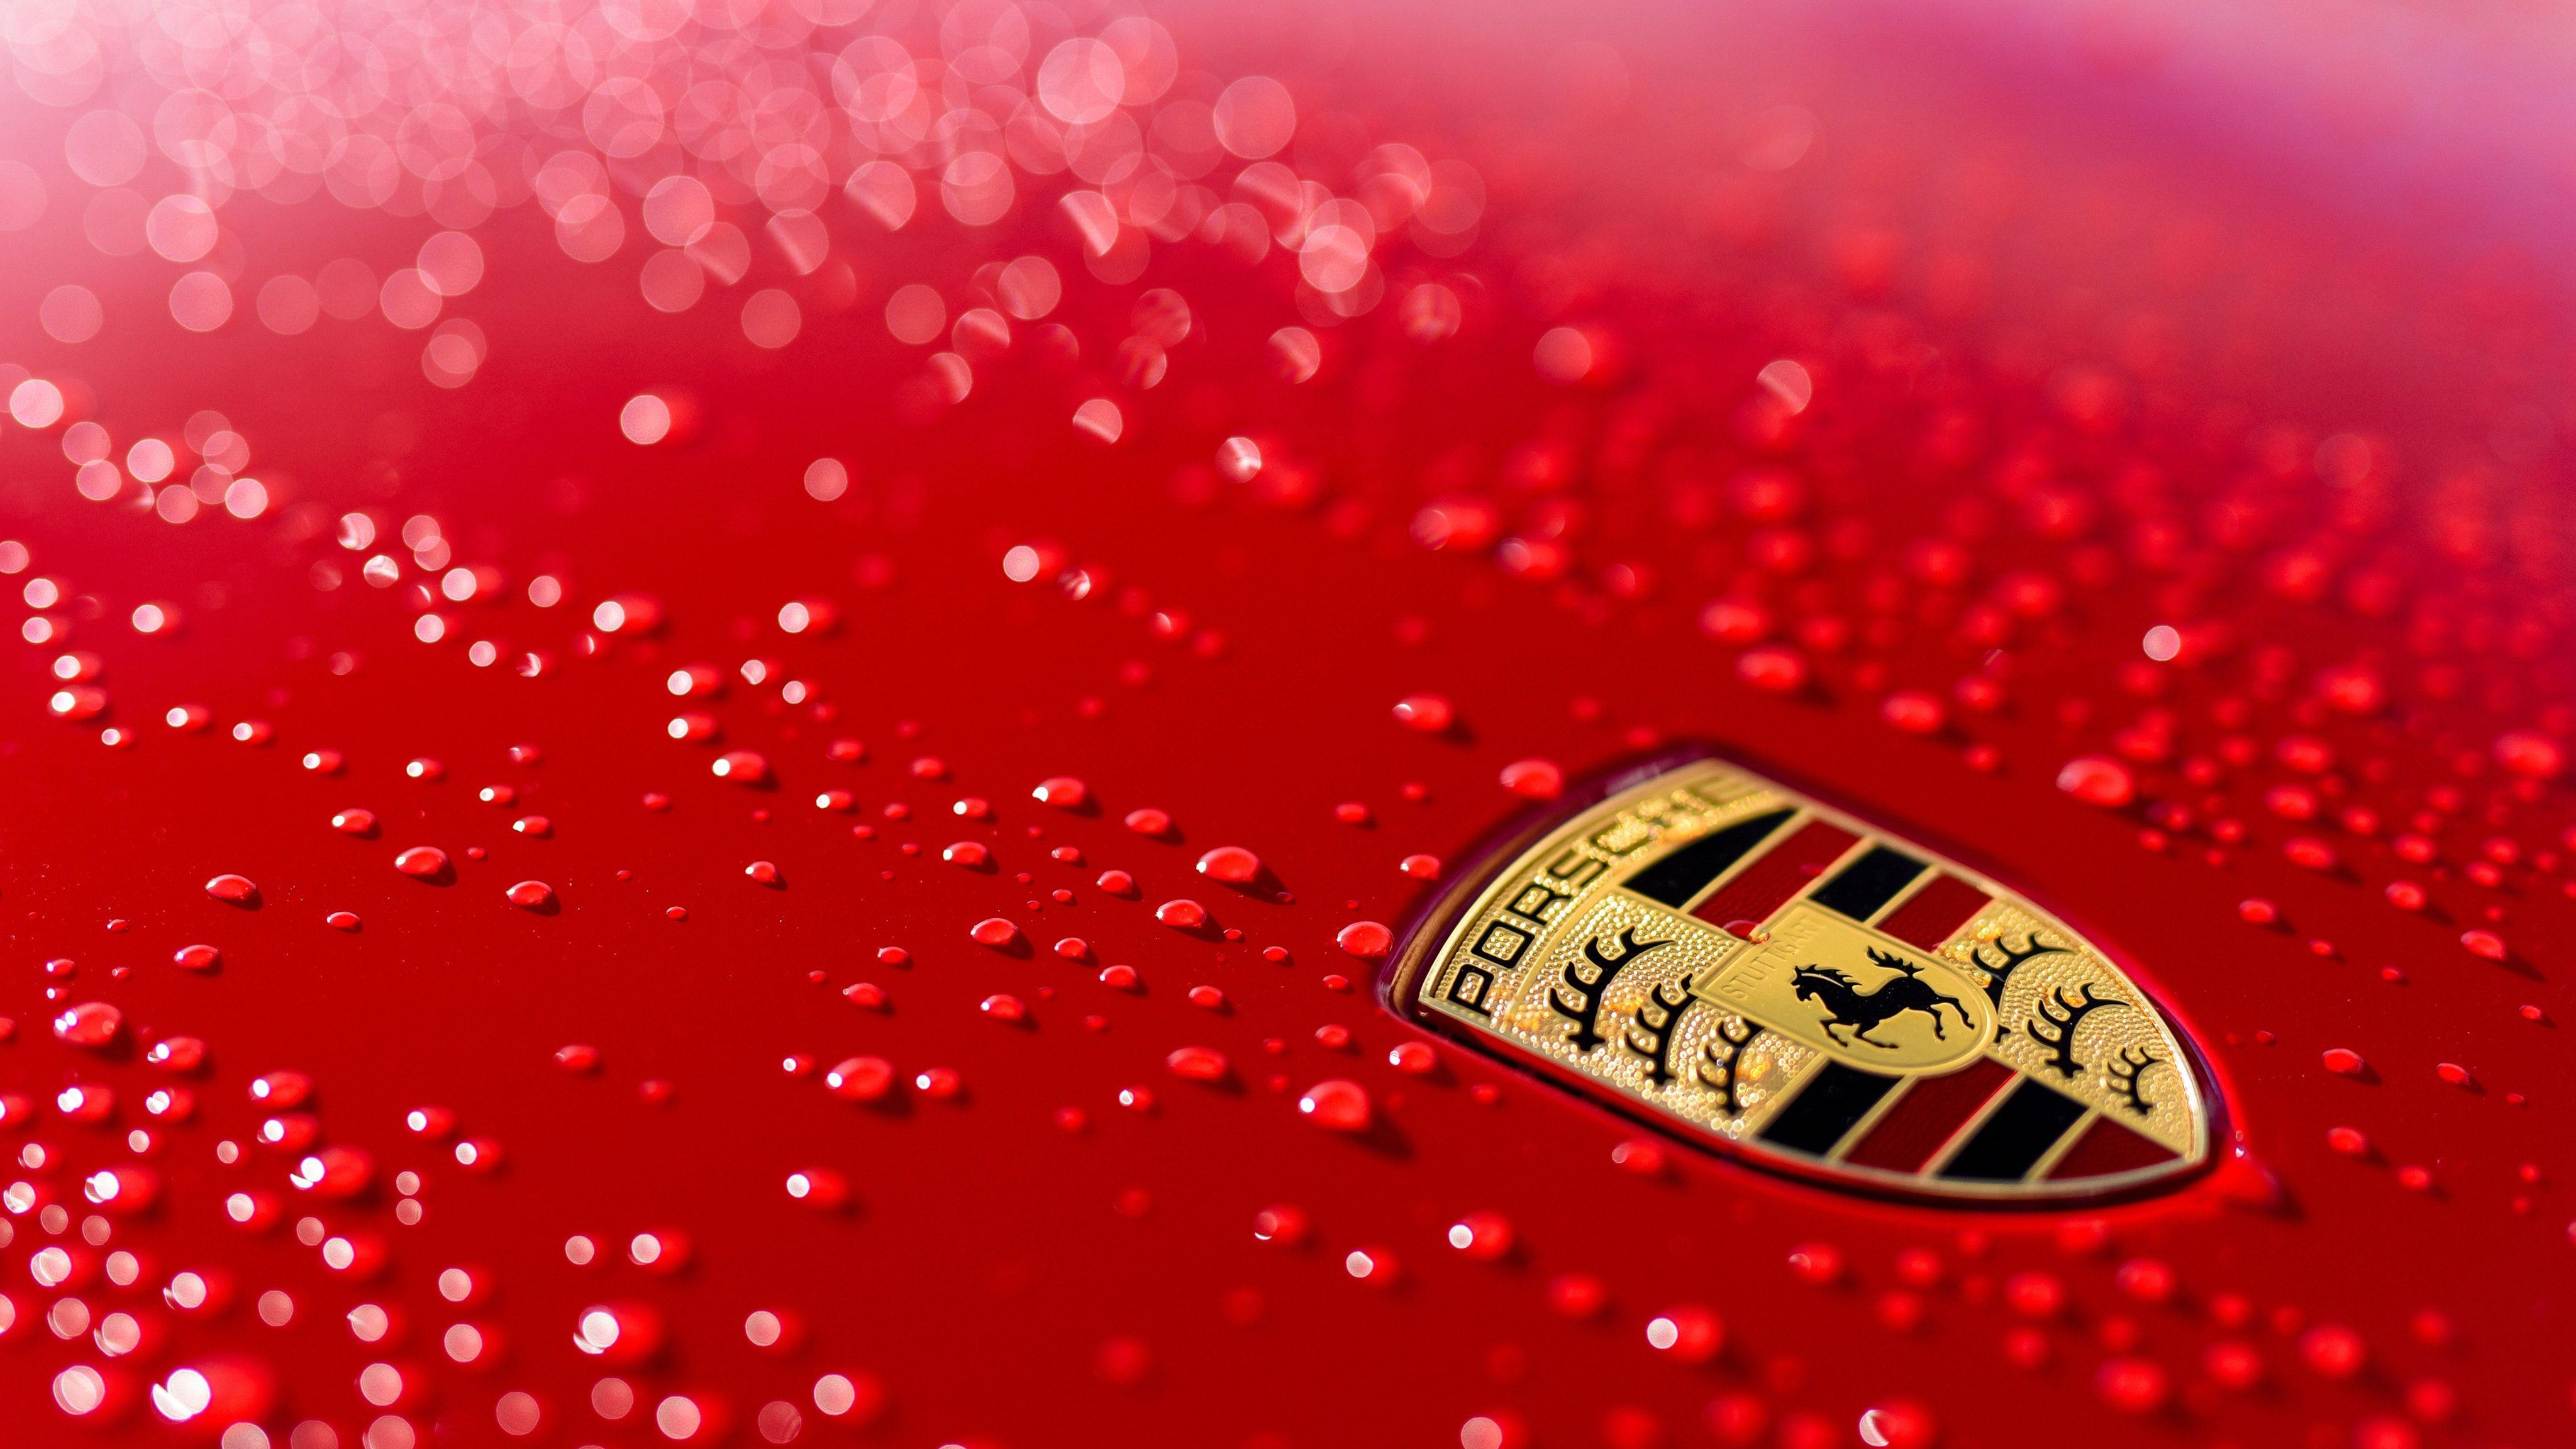 If I with Red Logo - 4K Porsche Red Logo Water Drops Wallpaper and Free Stock